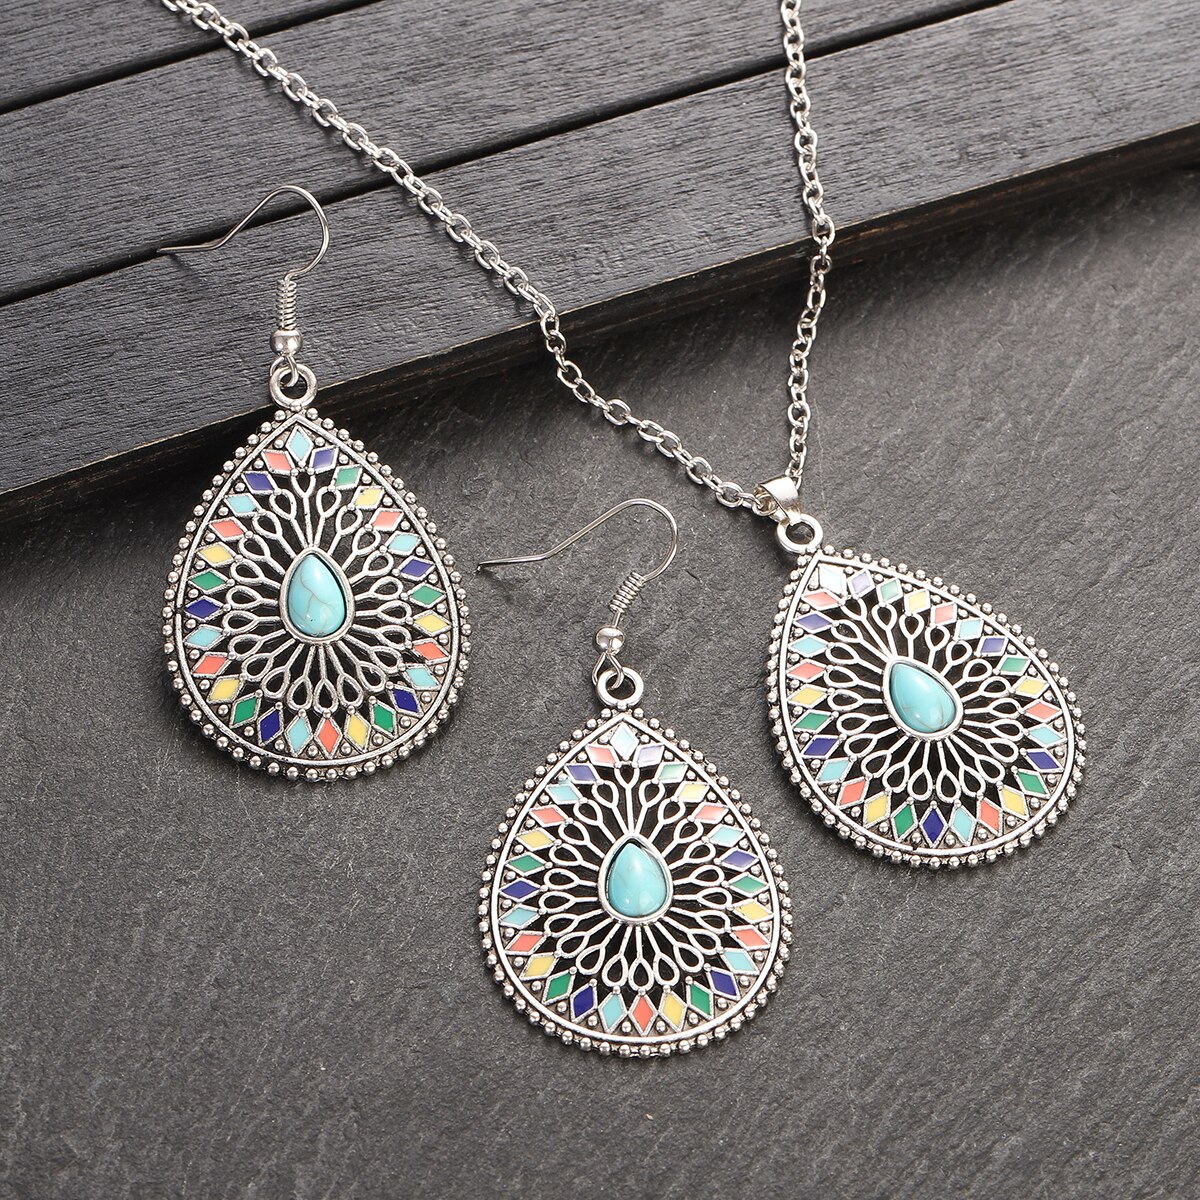 Classic-Ethnic-Silver-Color-Water-Drop-Jewelry-Sets-Ladies-Bohemia-Colorful-Flowers-Pendant-Necklace-1005004920943652-1